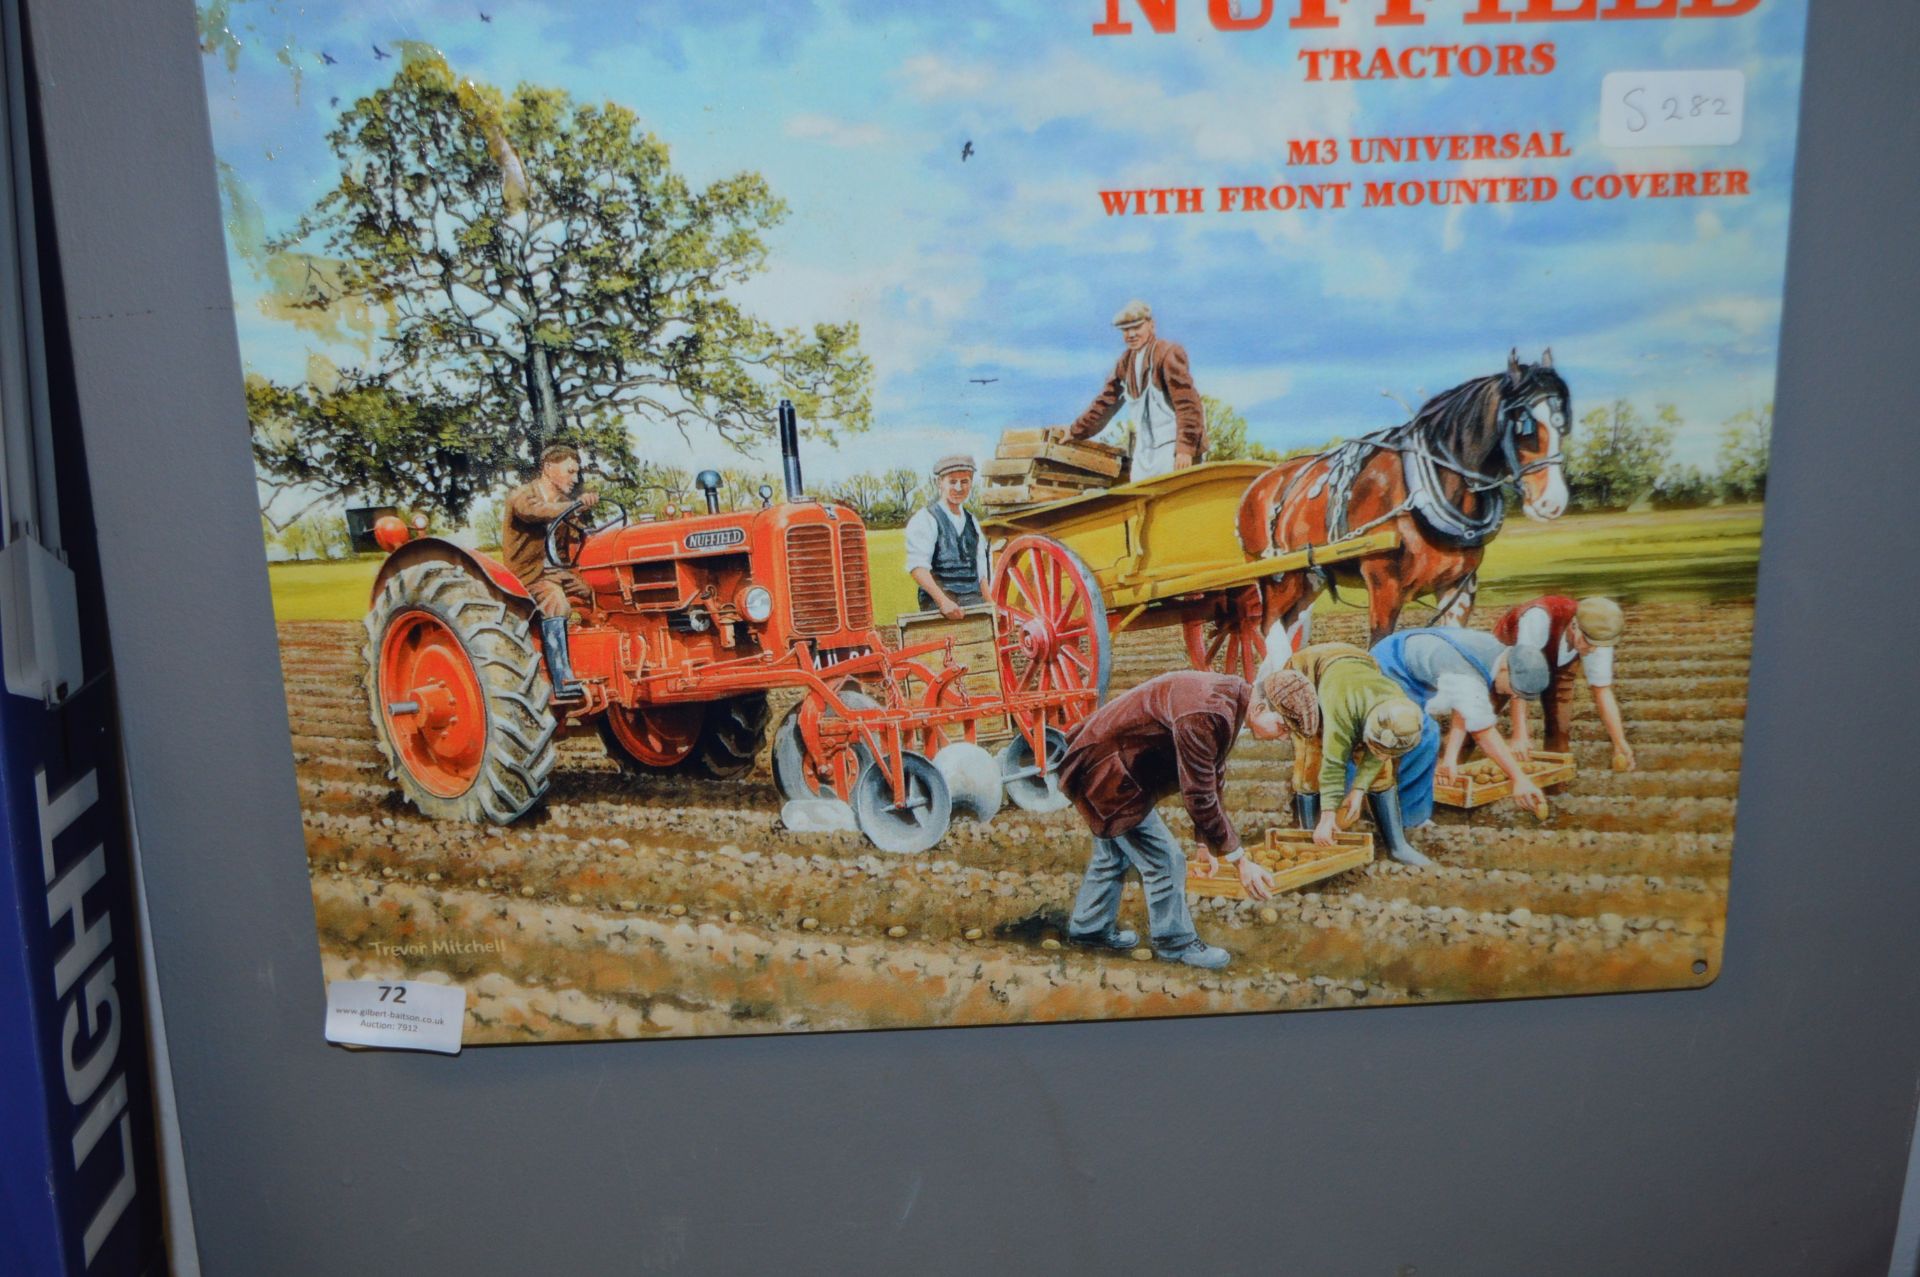 *Reproduction Enamel Sign - Nuffield Tractors